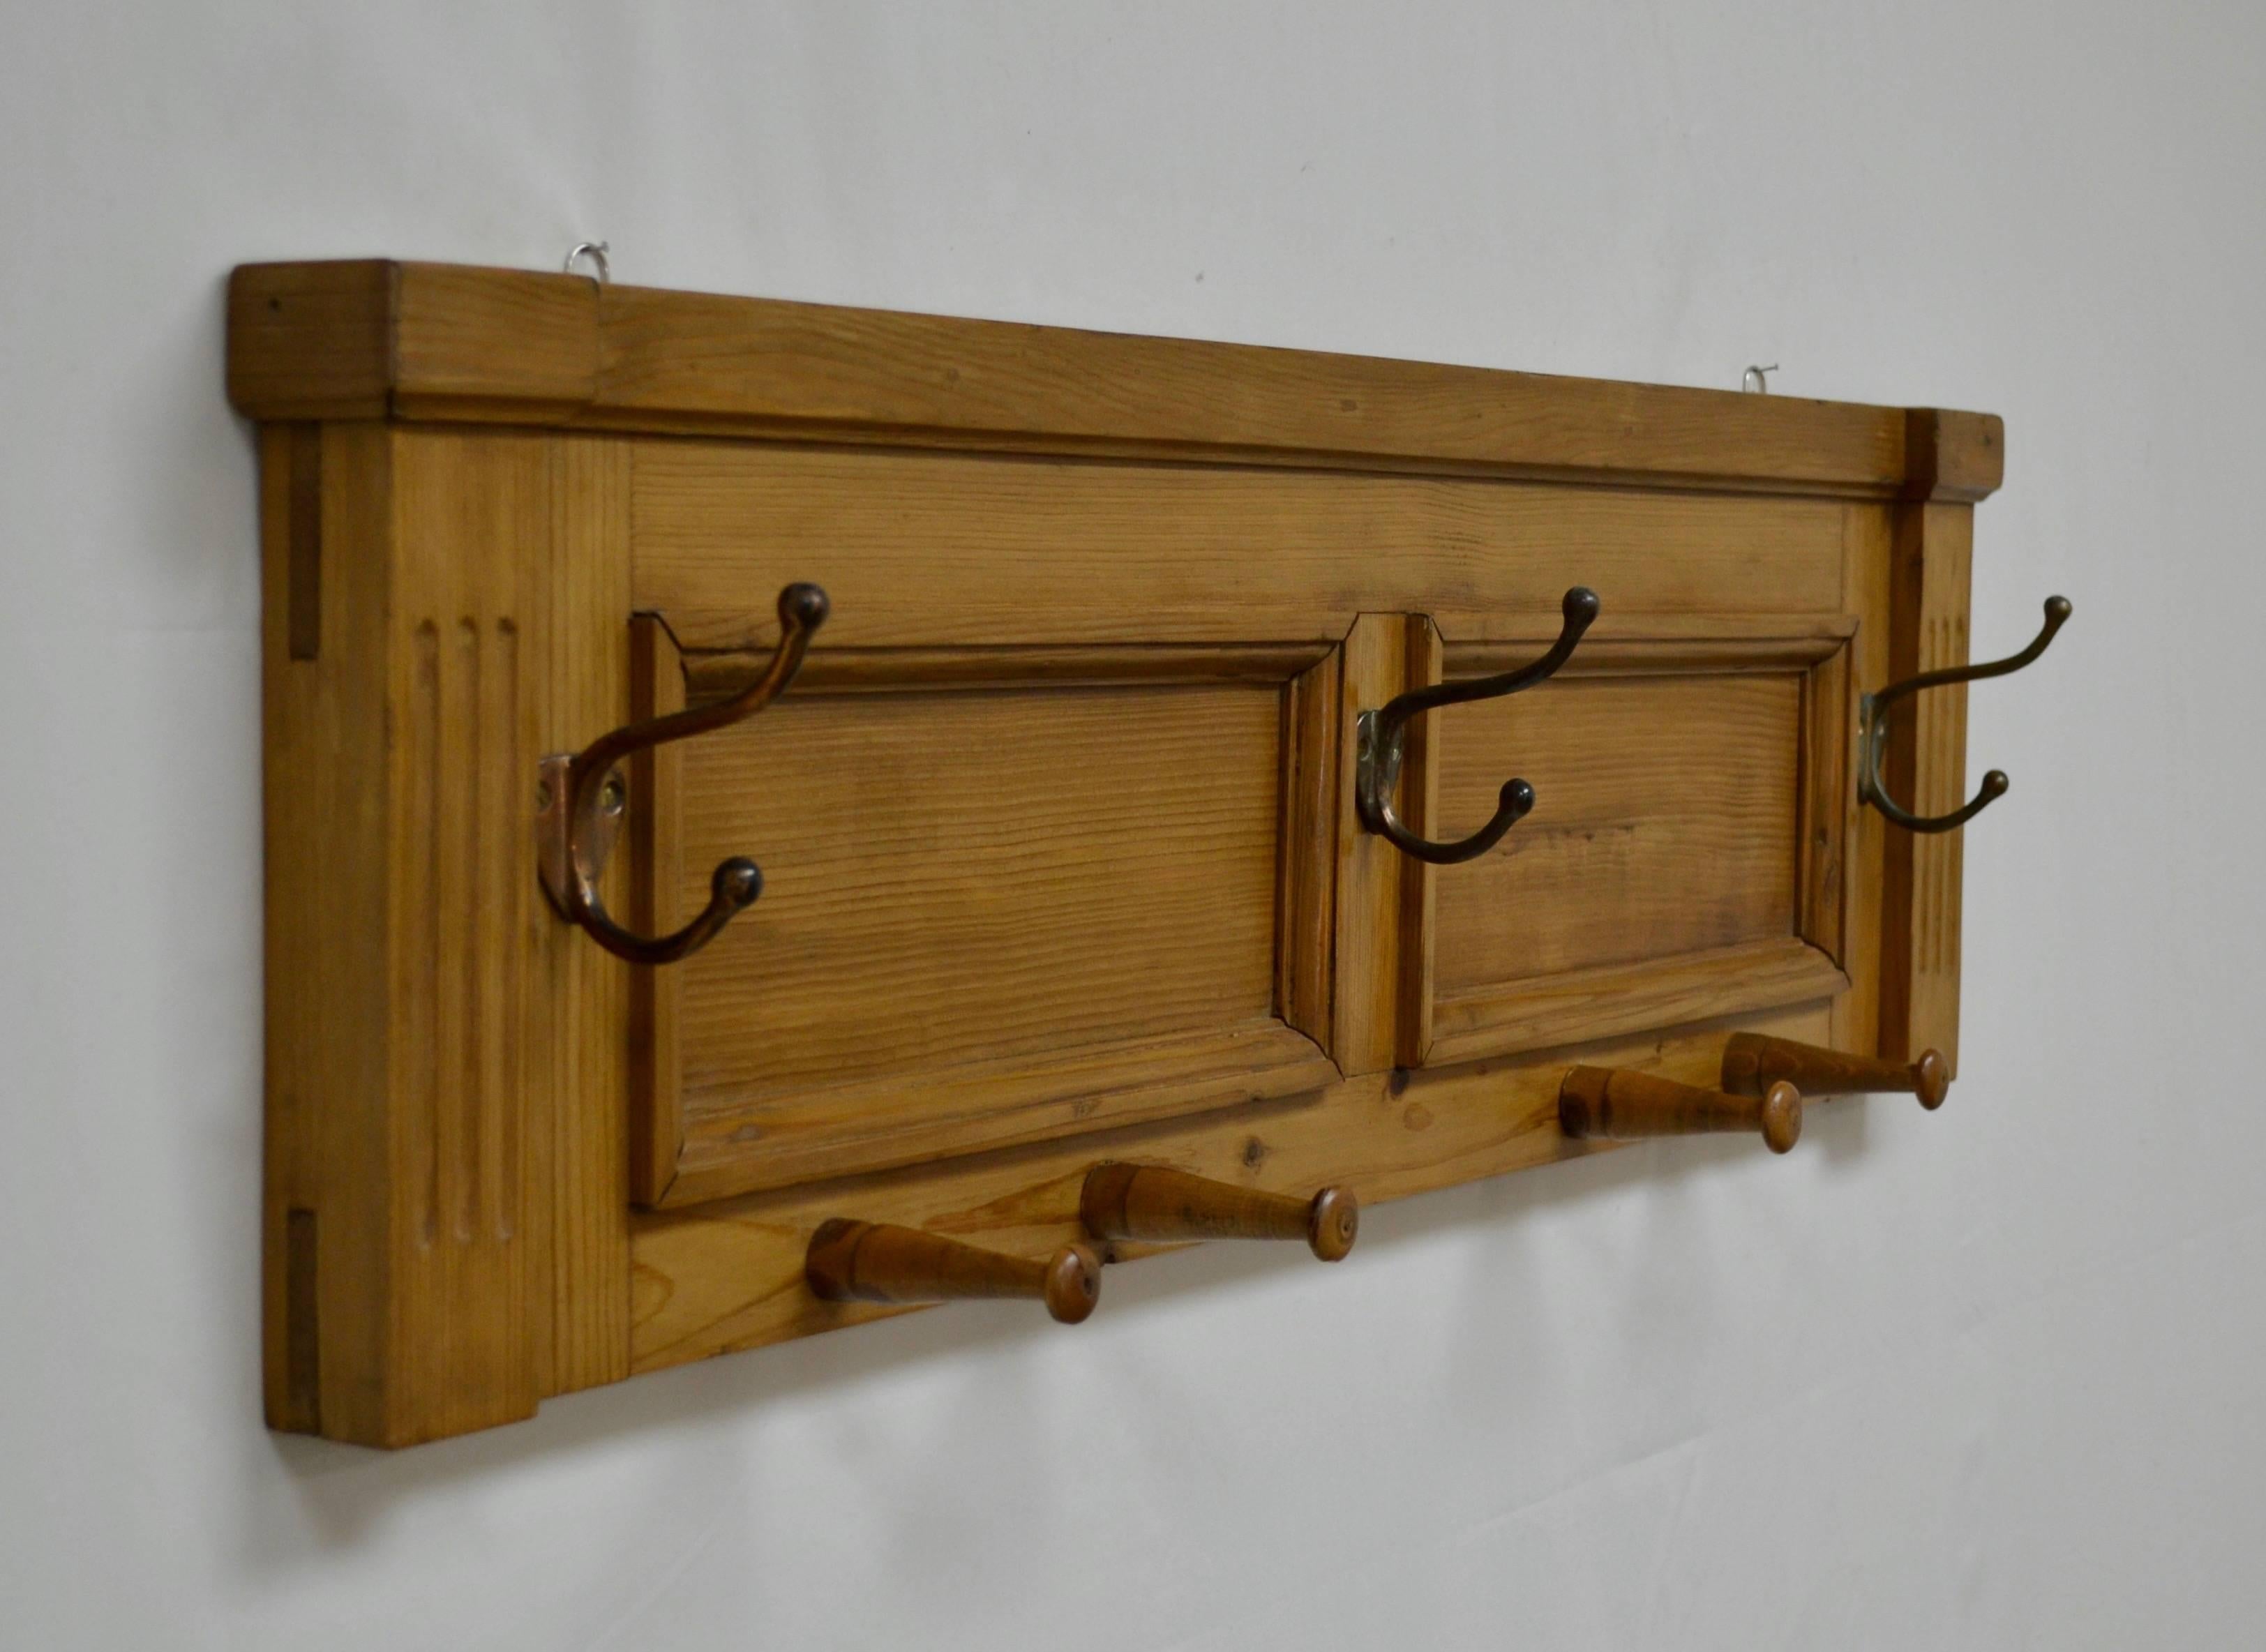 In a creative case of re-purposing, an orphan two panelled backboard from an antique Hungarian pine buffet has been fitted with three vintage metal coat hooks and four antique shaker-style wooden pegs to make this handsome and versatile wall-mounted